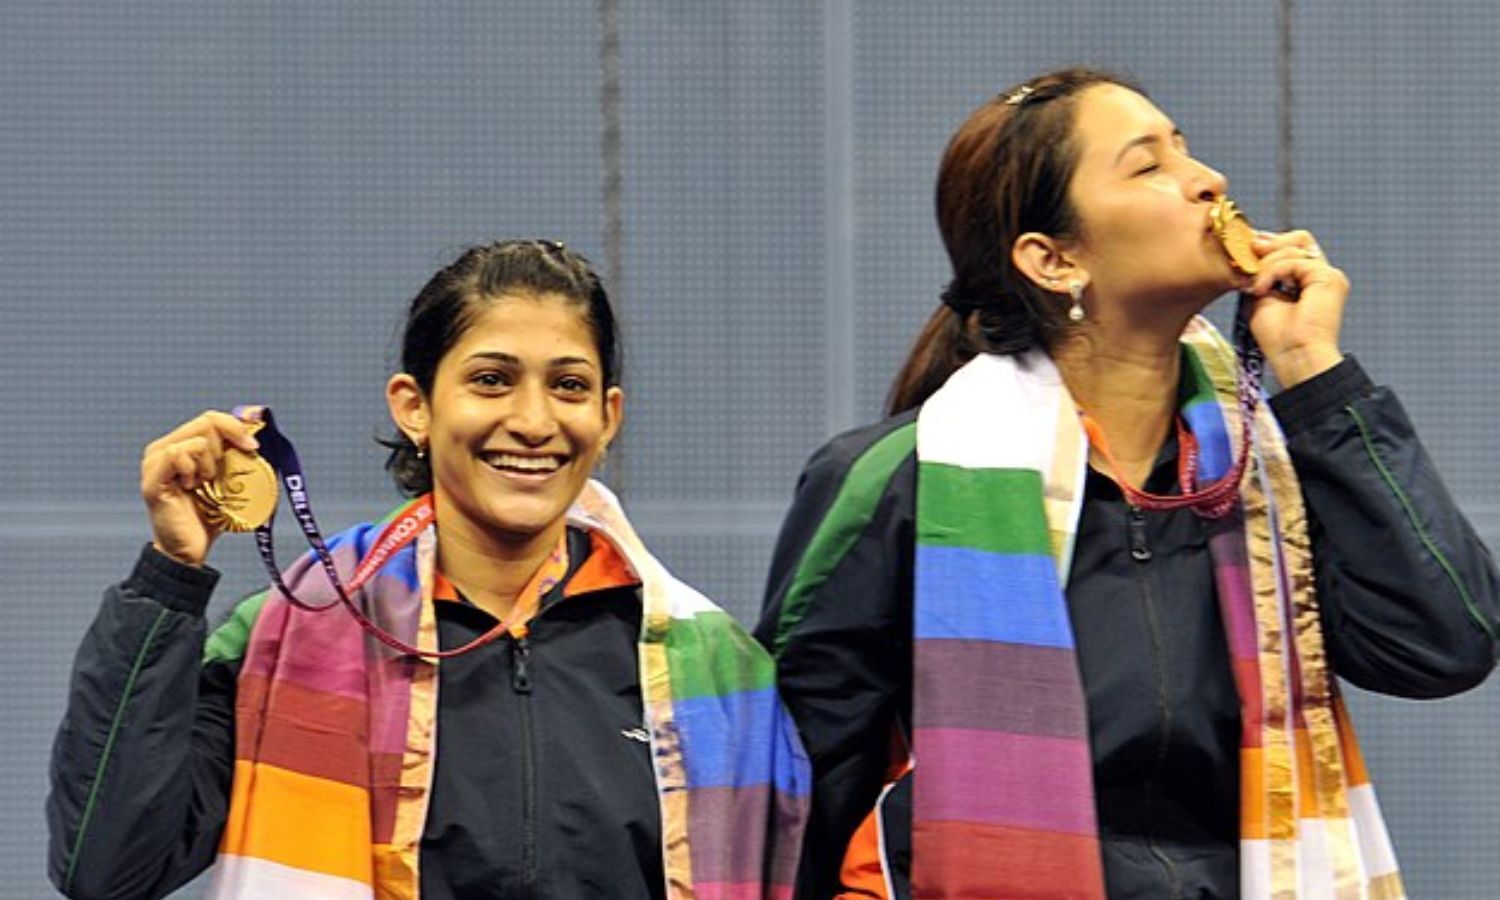 12 years after being topped champion, Ashwini Ponnappa returns with fame starvation